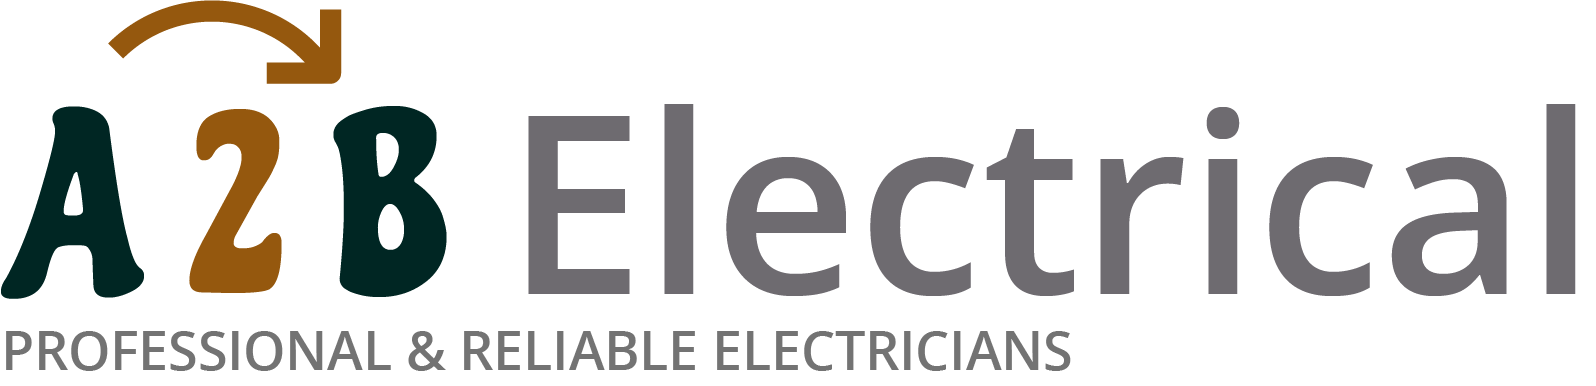 If you have electrical wiring problems in Torquay, we can provide an electrician to have a look for you. 